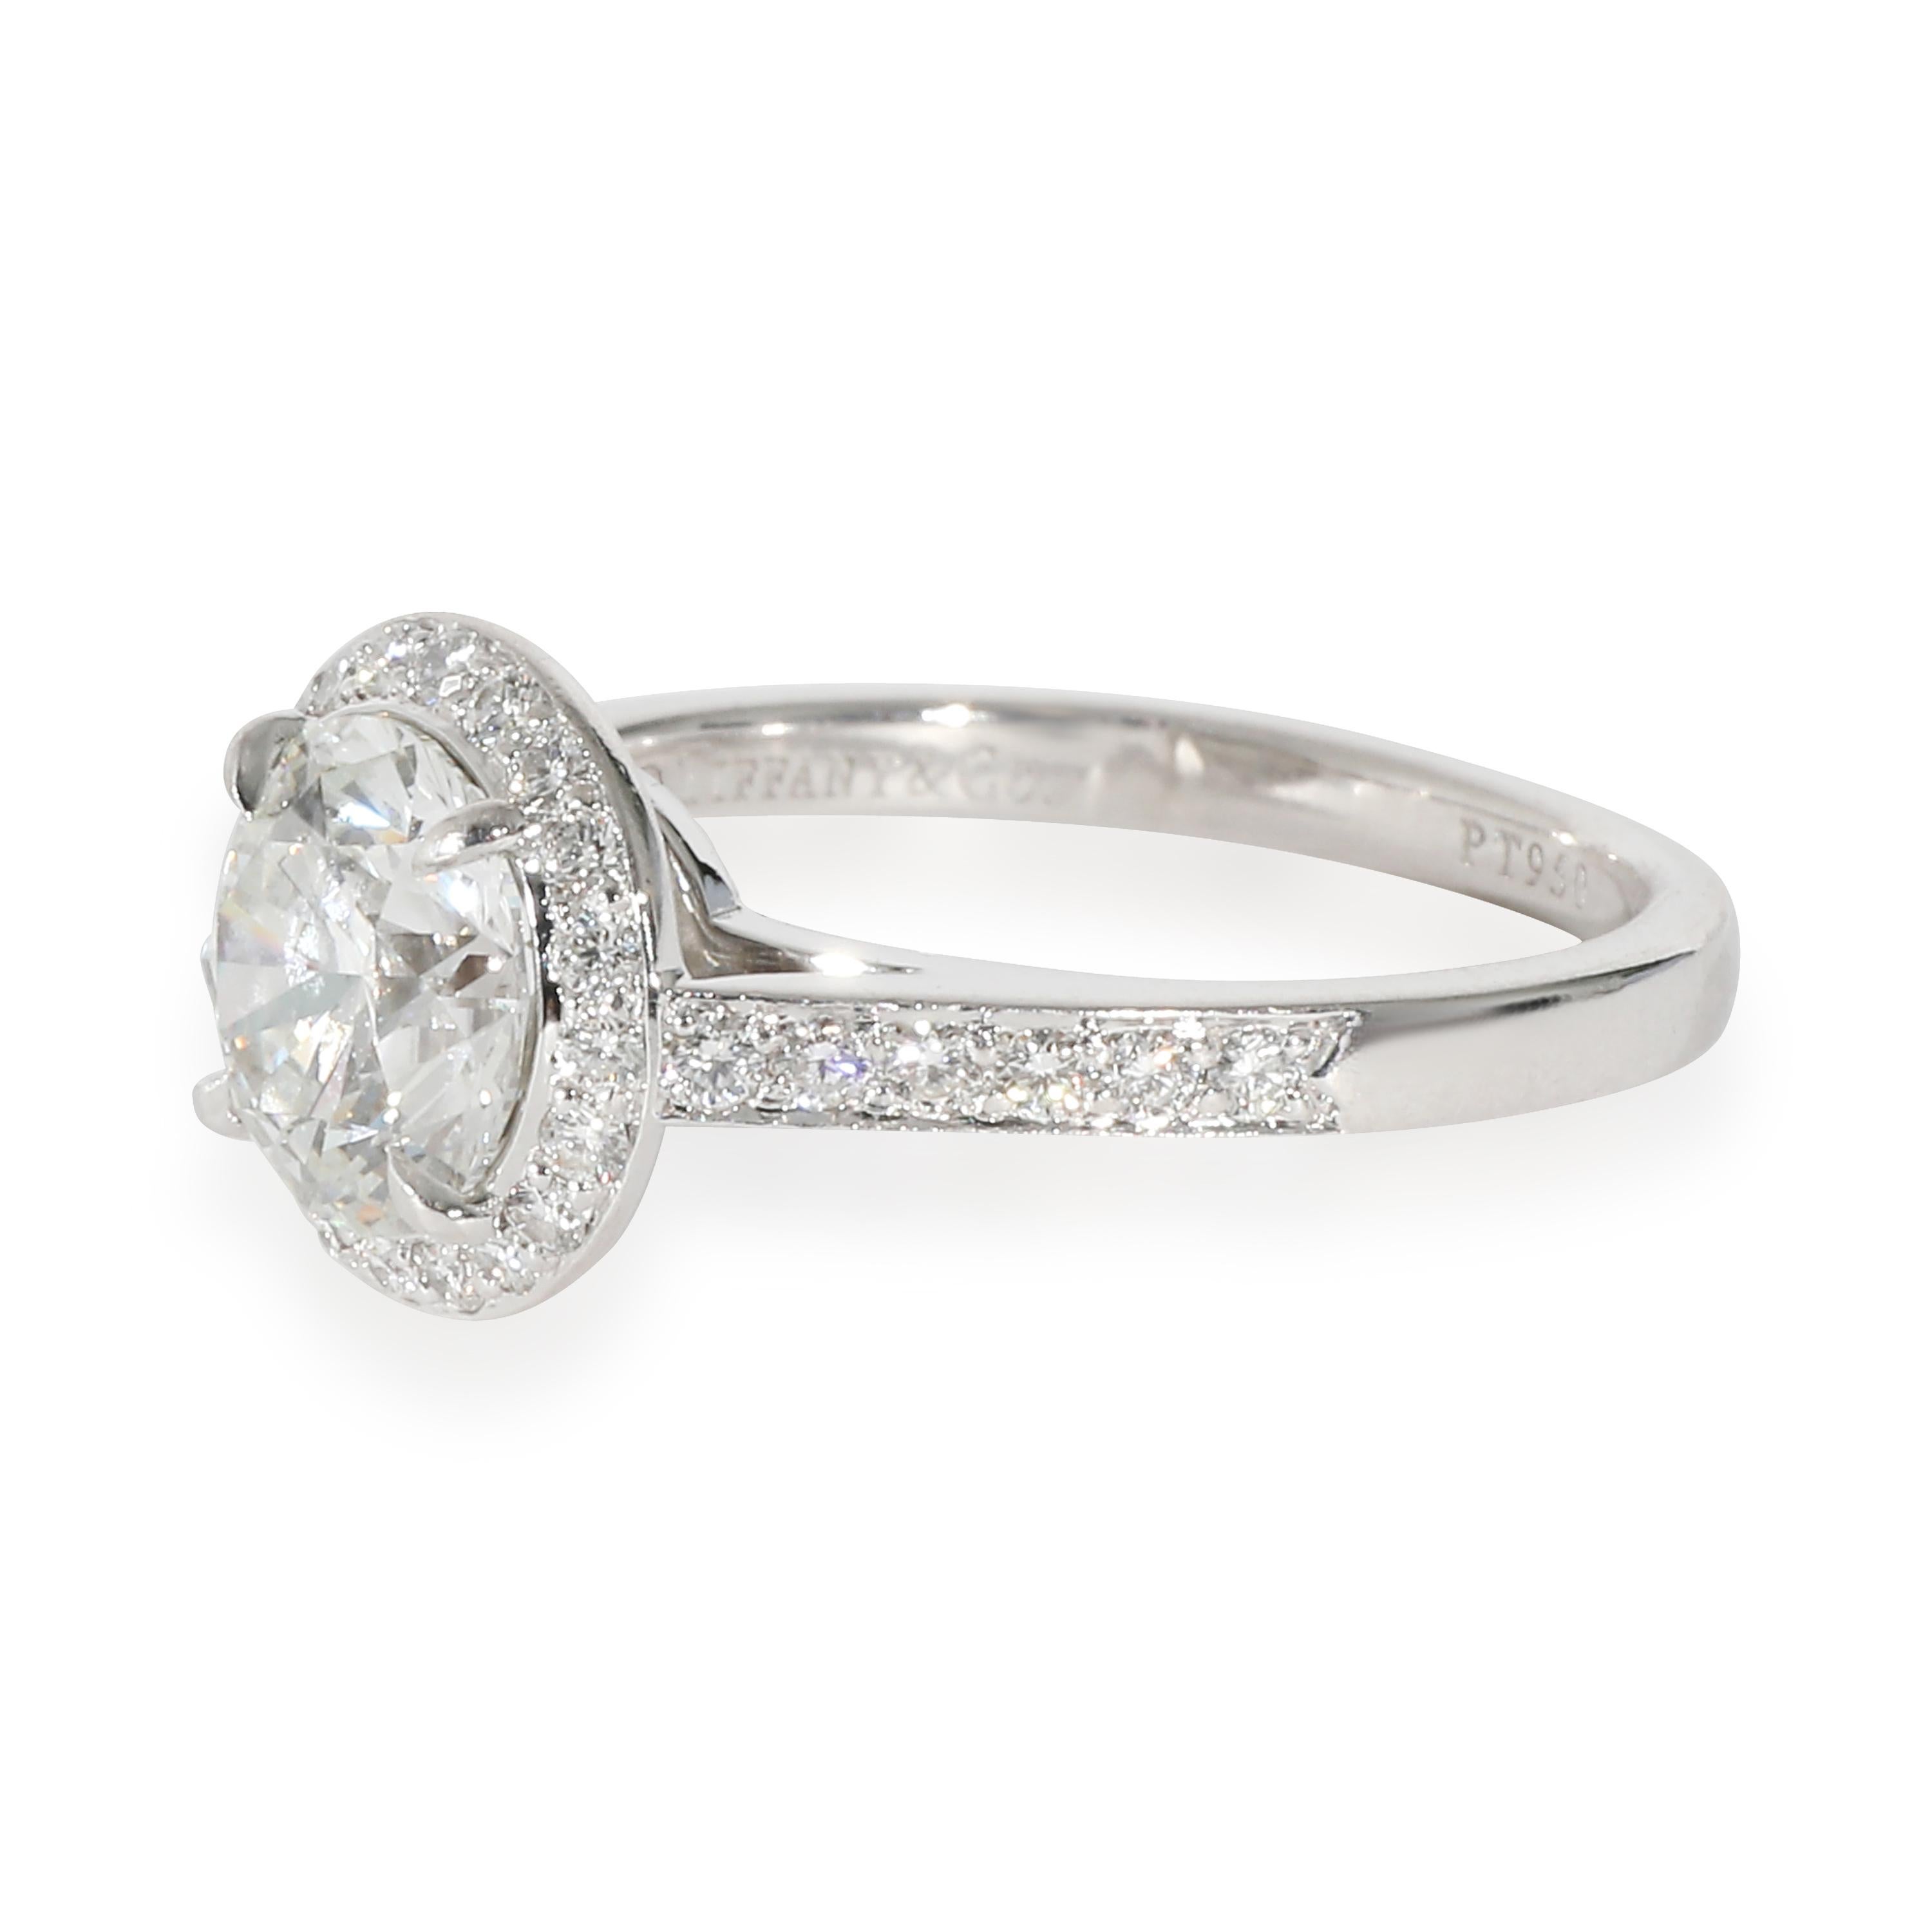 Tiffany & Co. Halo Engagement Ring in Platinum G VVS2 1.66 CTW In Excellent Condition For Sale In New York, NY